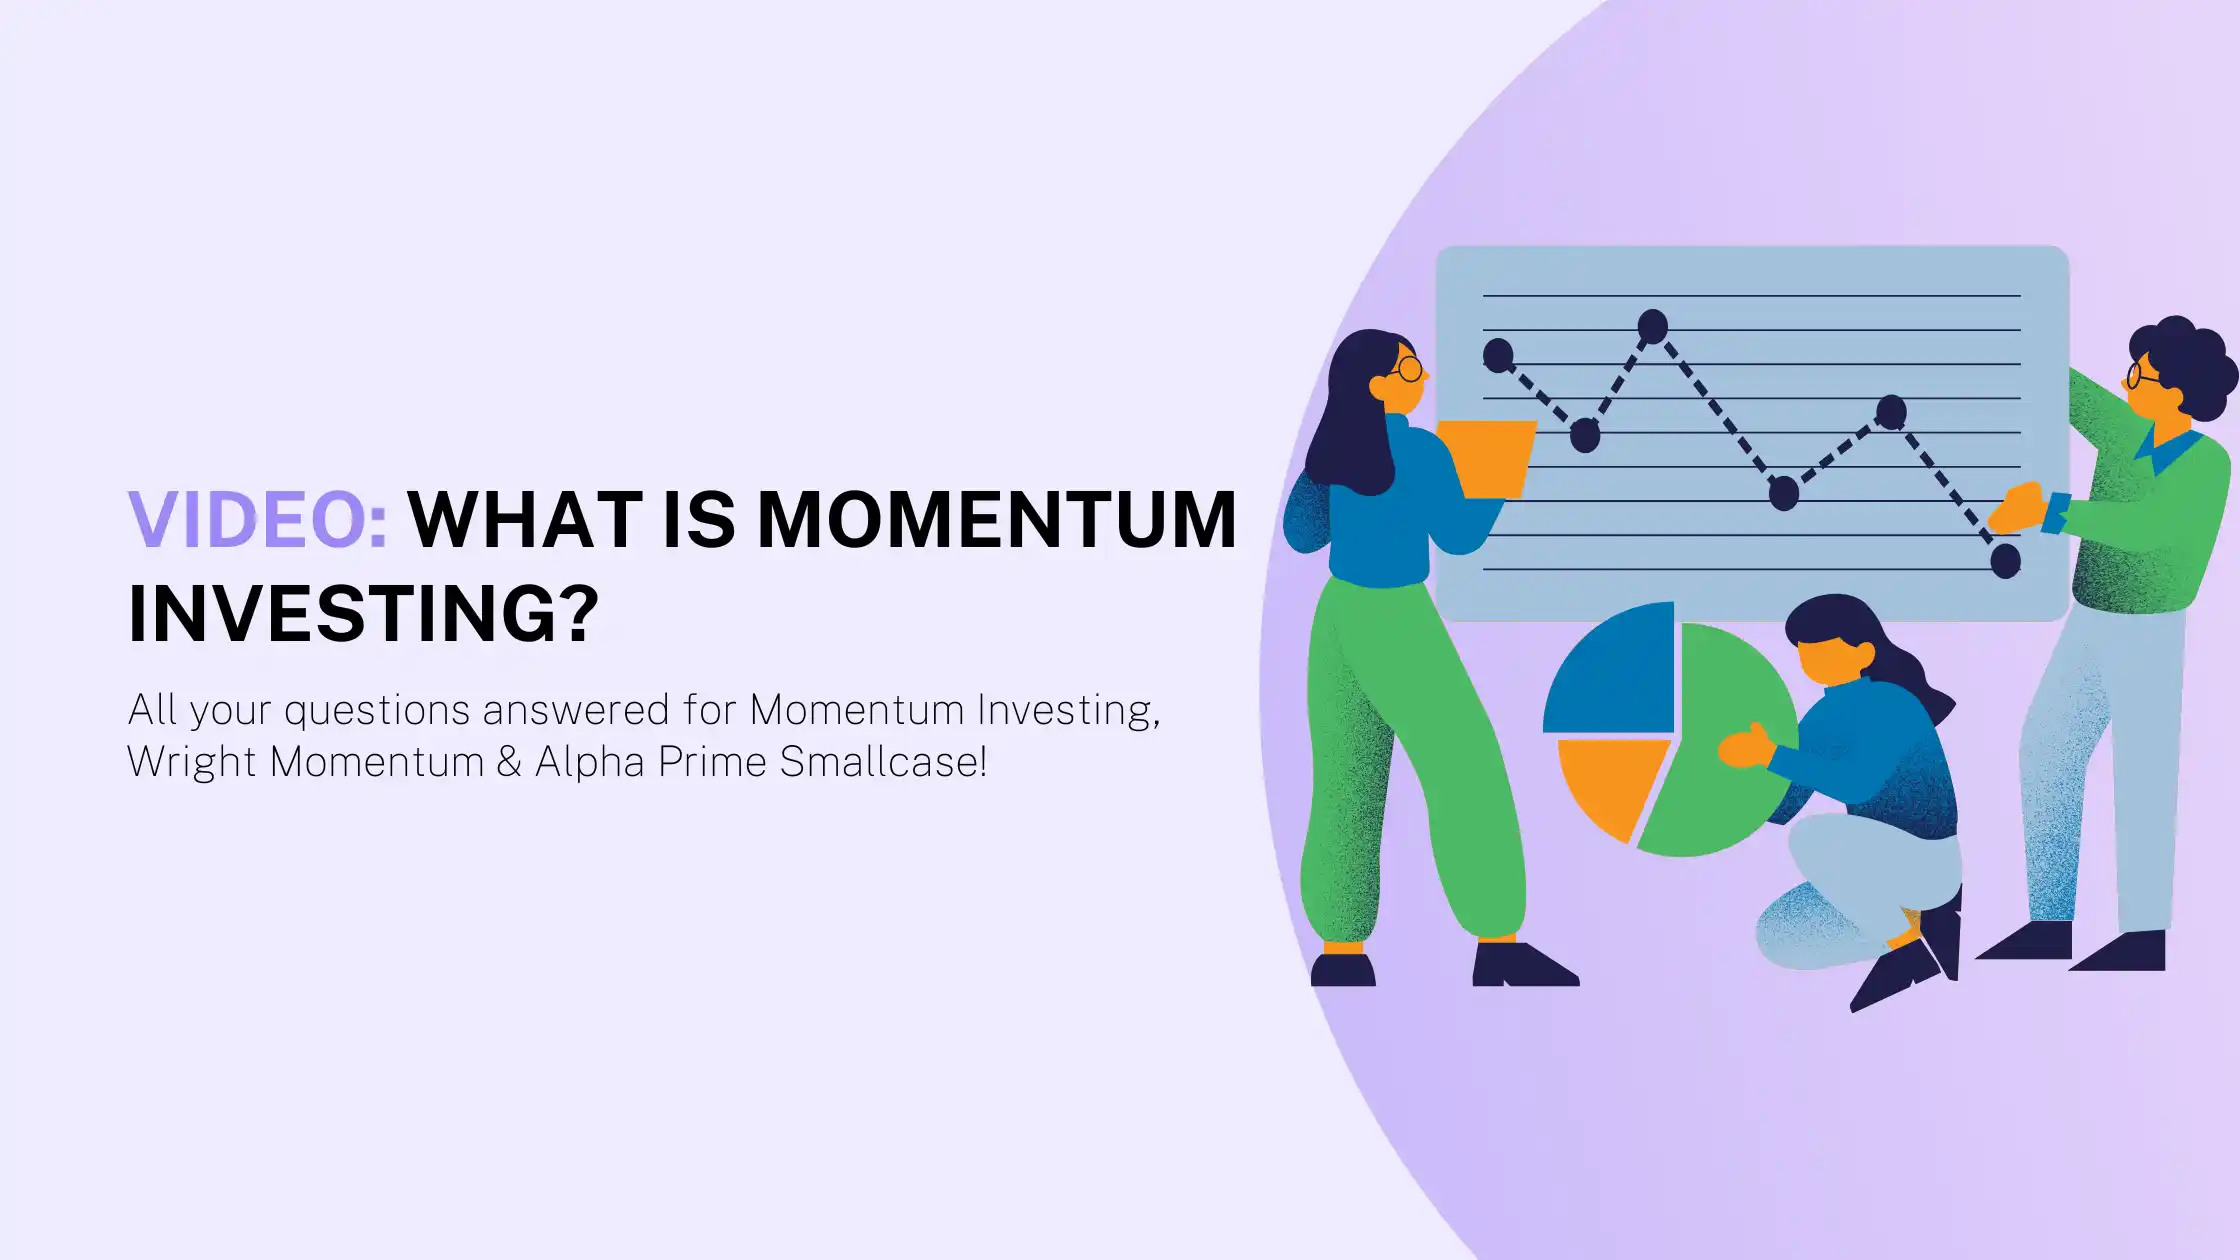 What is momentum investing? All your questions answered for Wright Momentum & Alpha Prime Smallcase!